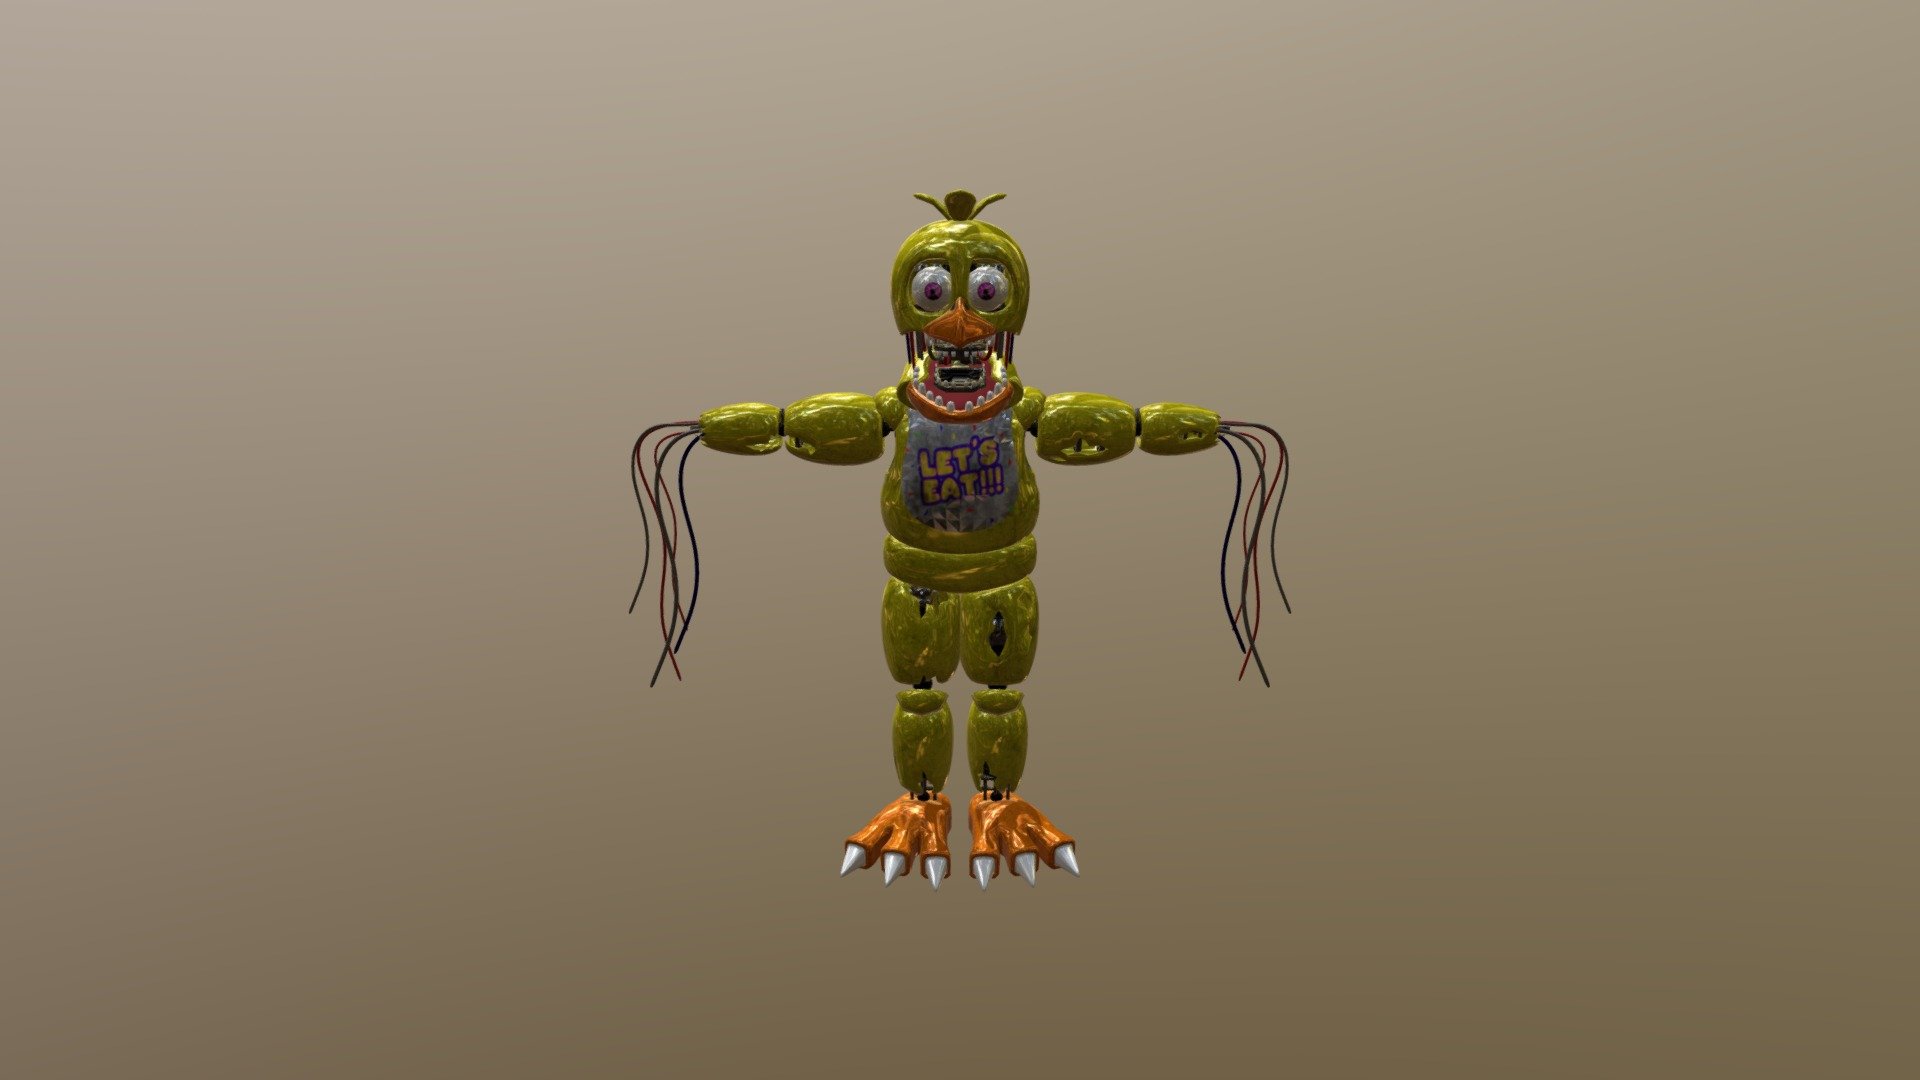 Withered-chica - 3D model by FreddyGamer343.